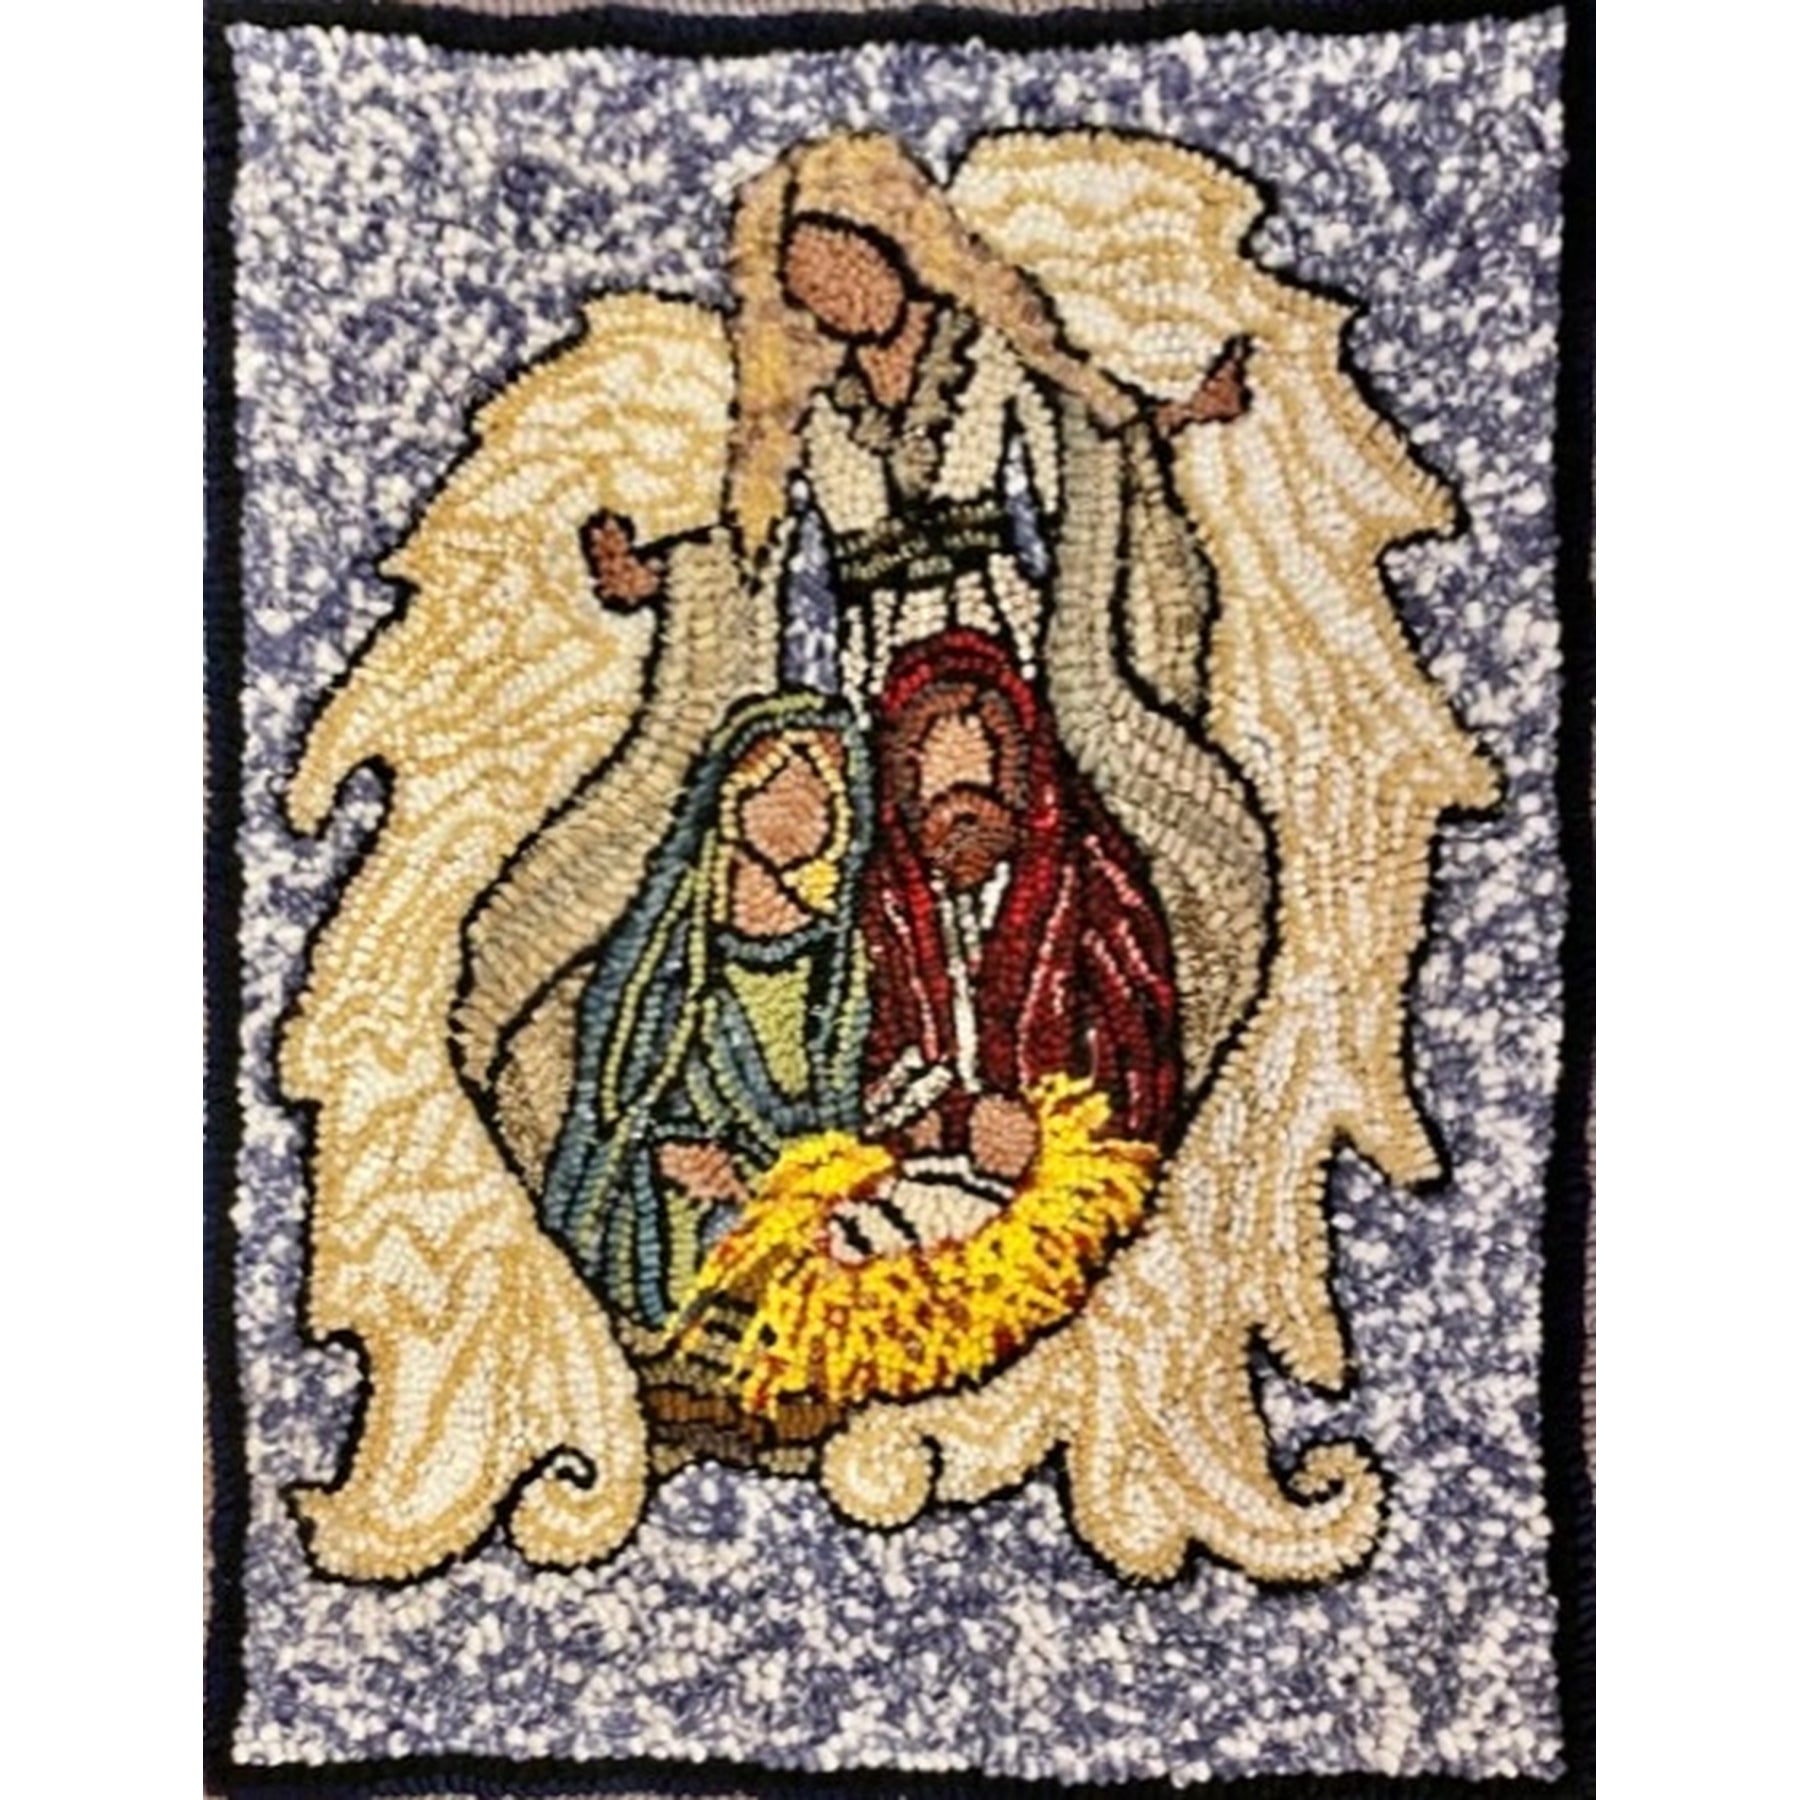 Holy Embrace, rug hooked by Susan Armusik